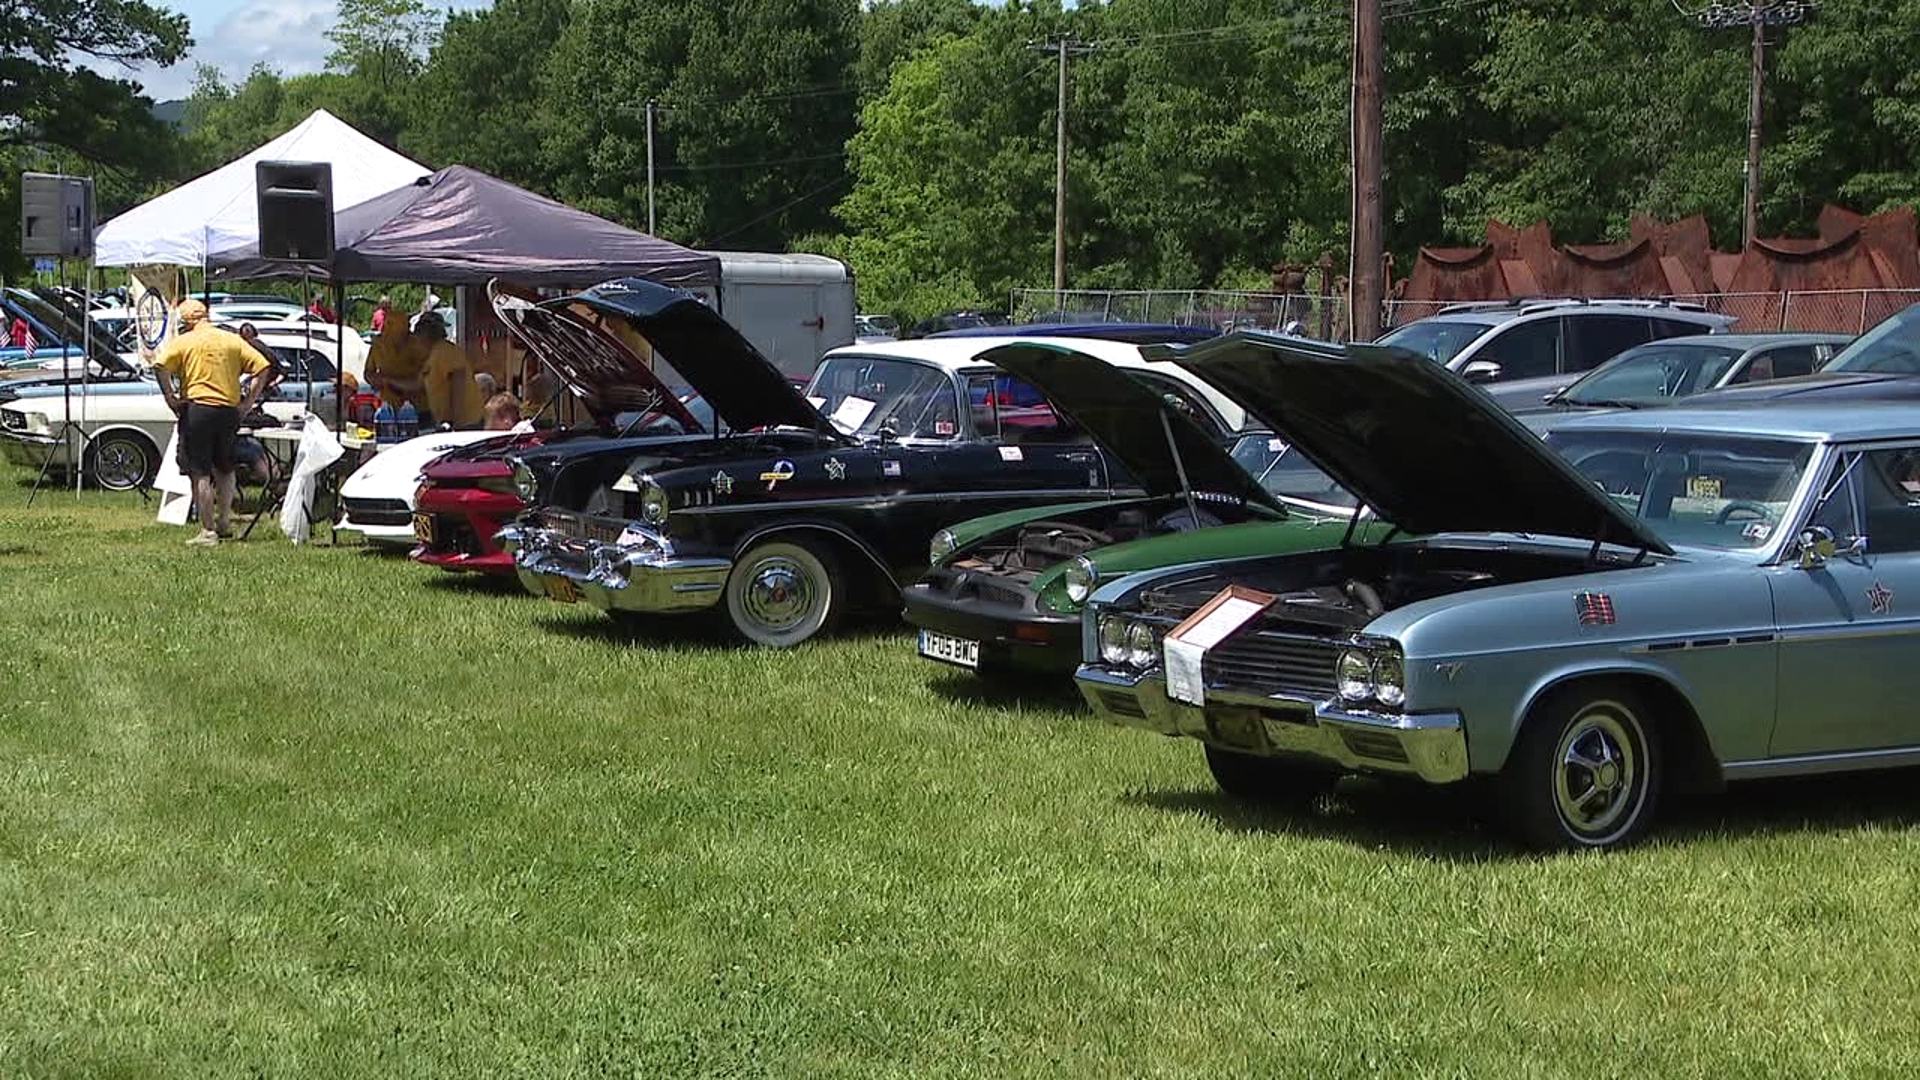 Classic cars filled the grounds at No. 9 Coal Mine and Museum in Lansford on Sunday.